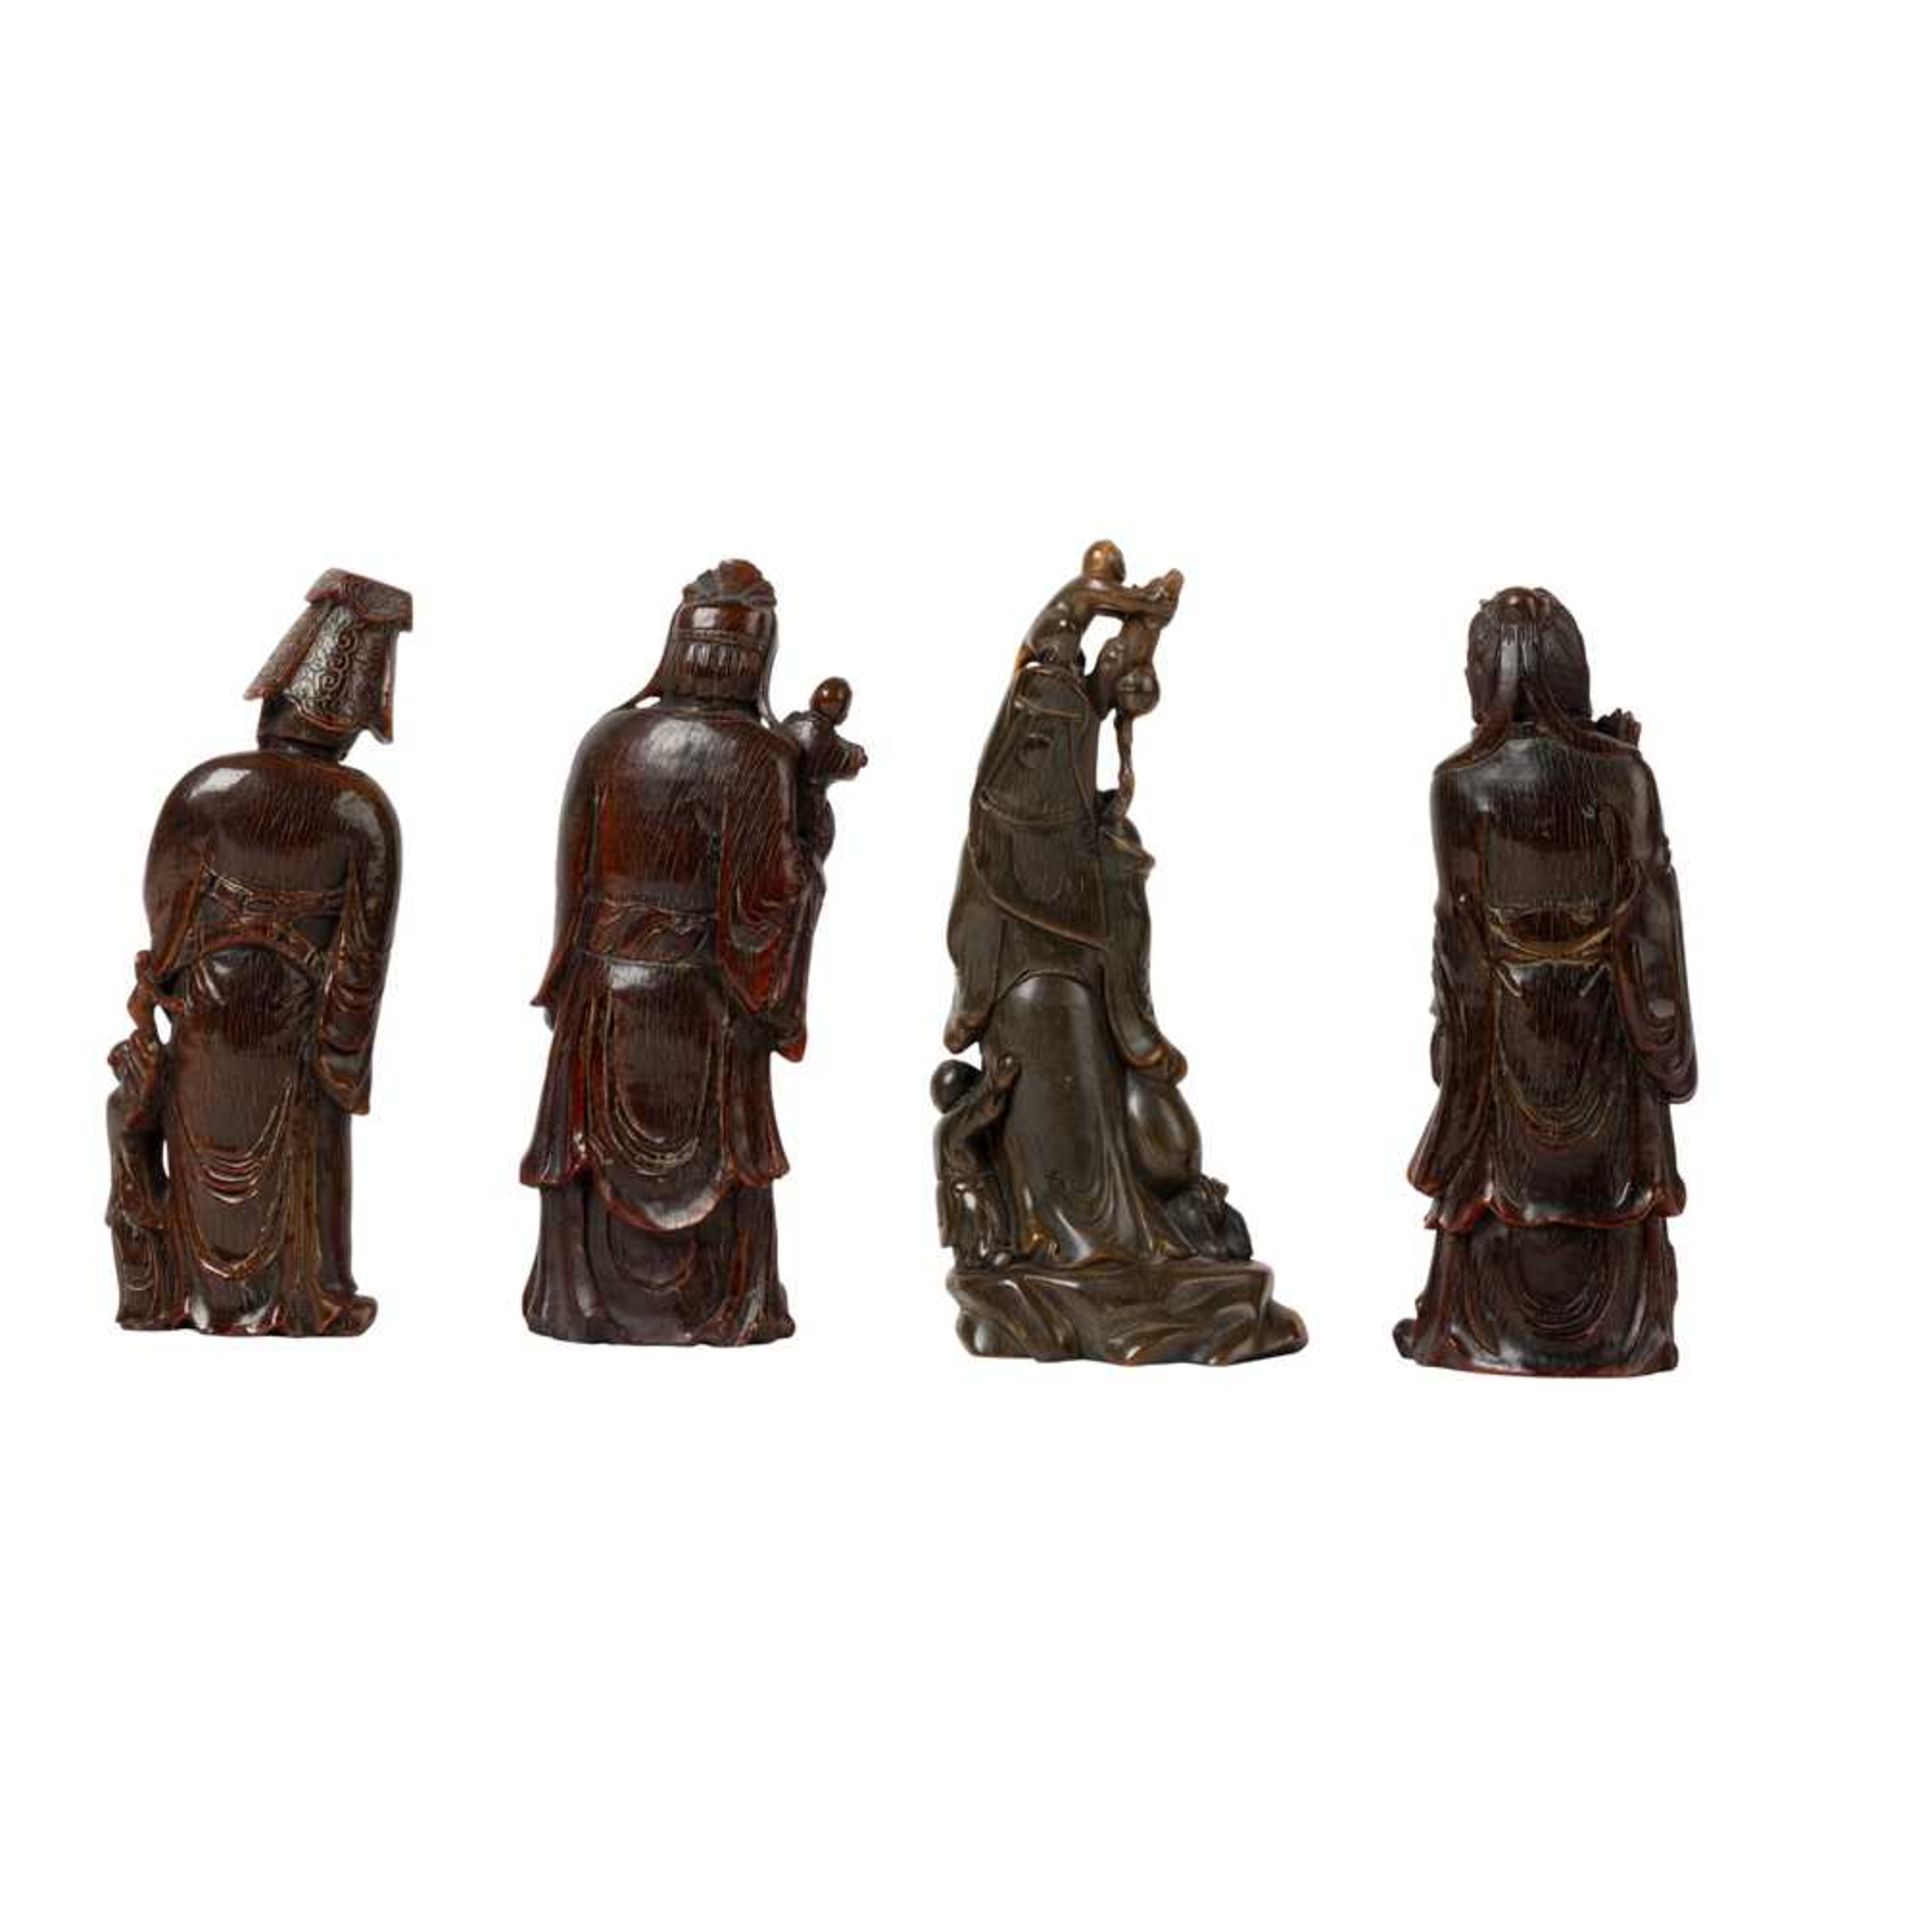 GROUP OF SIX CARVED BUFFALO HORN FIGURES 19TH-20TH CENTURY - Image 6 of 26